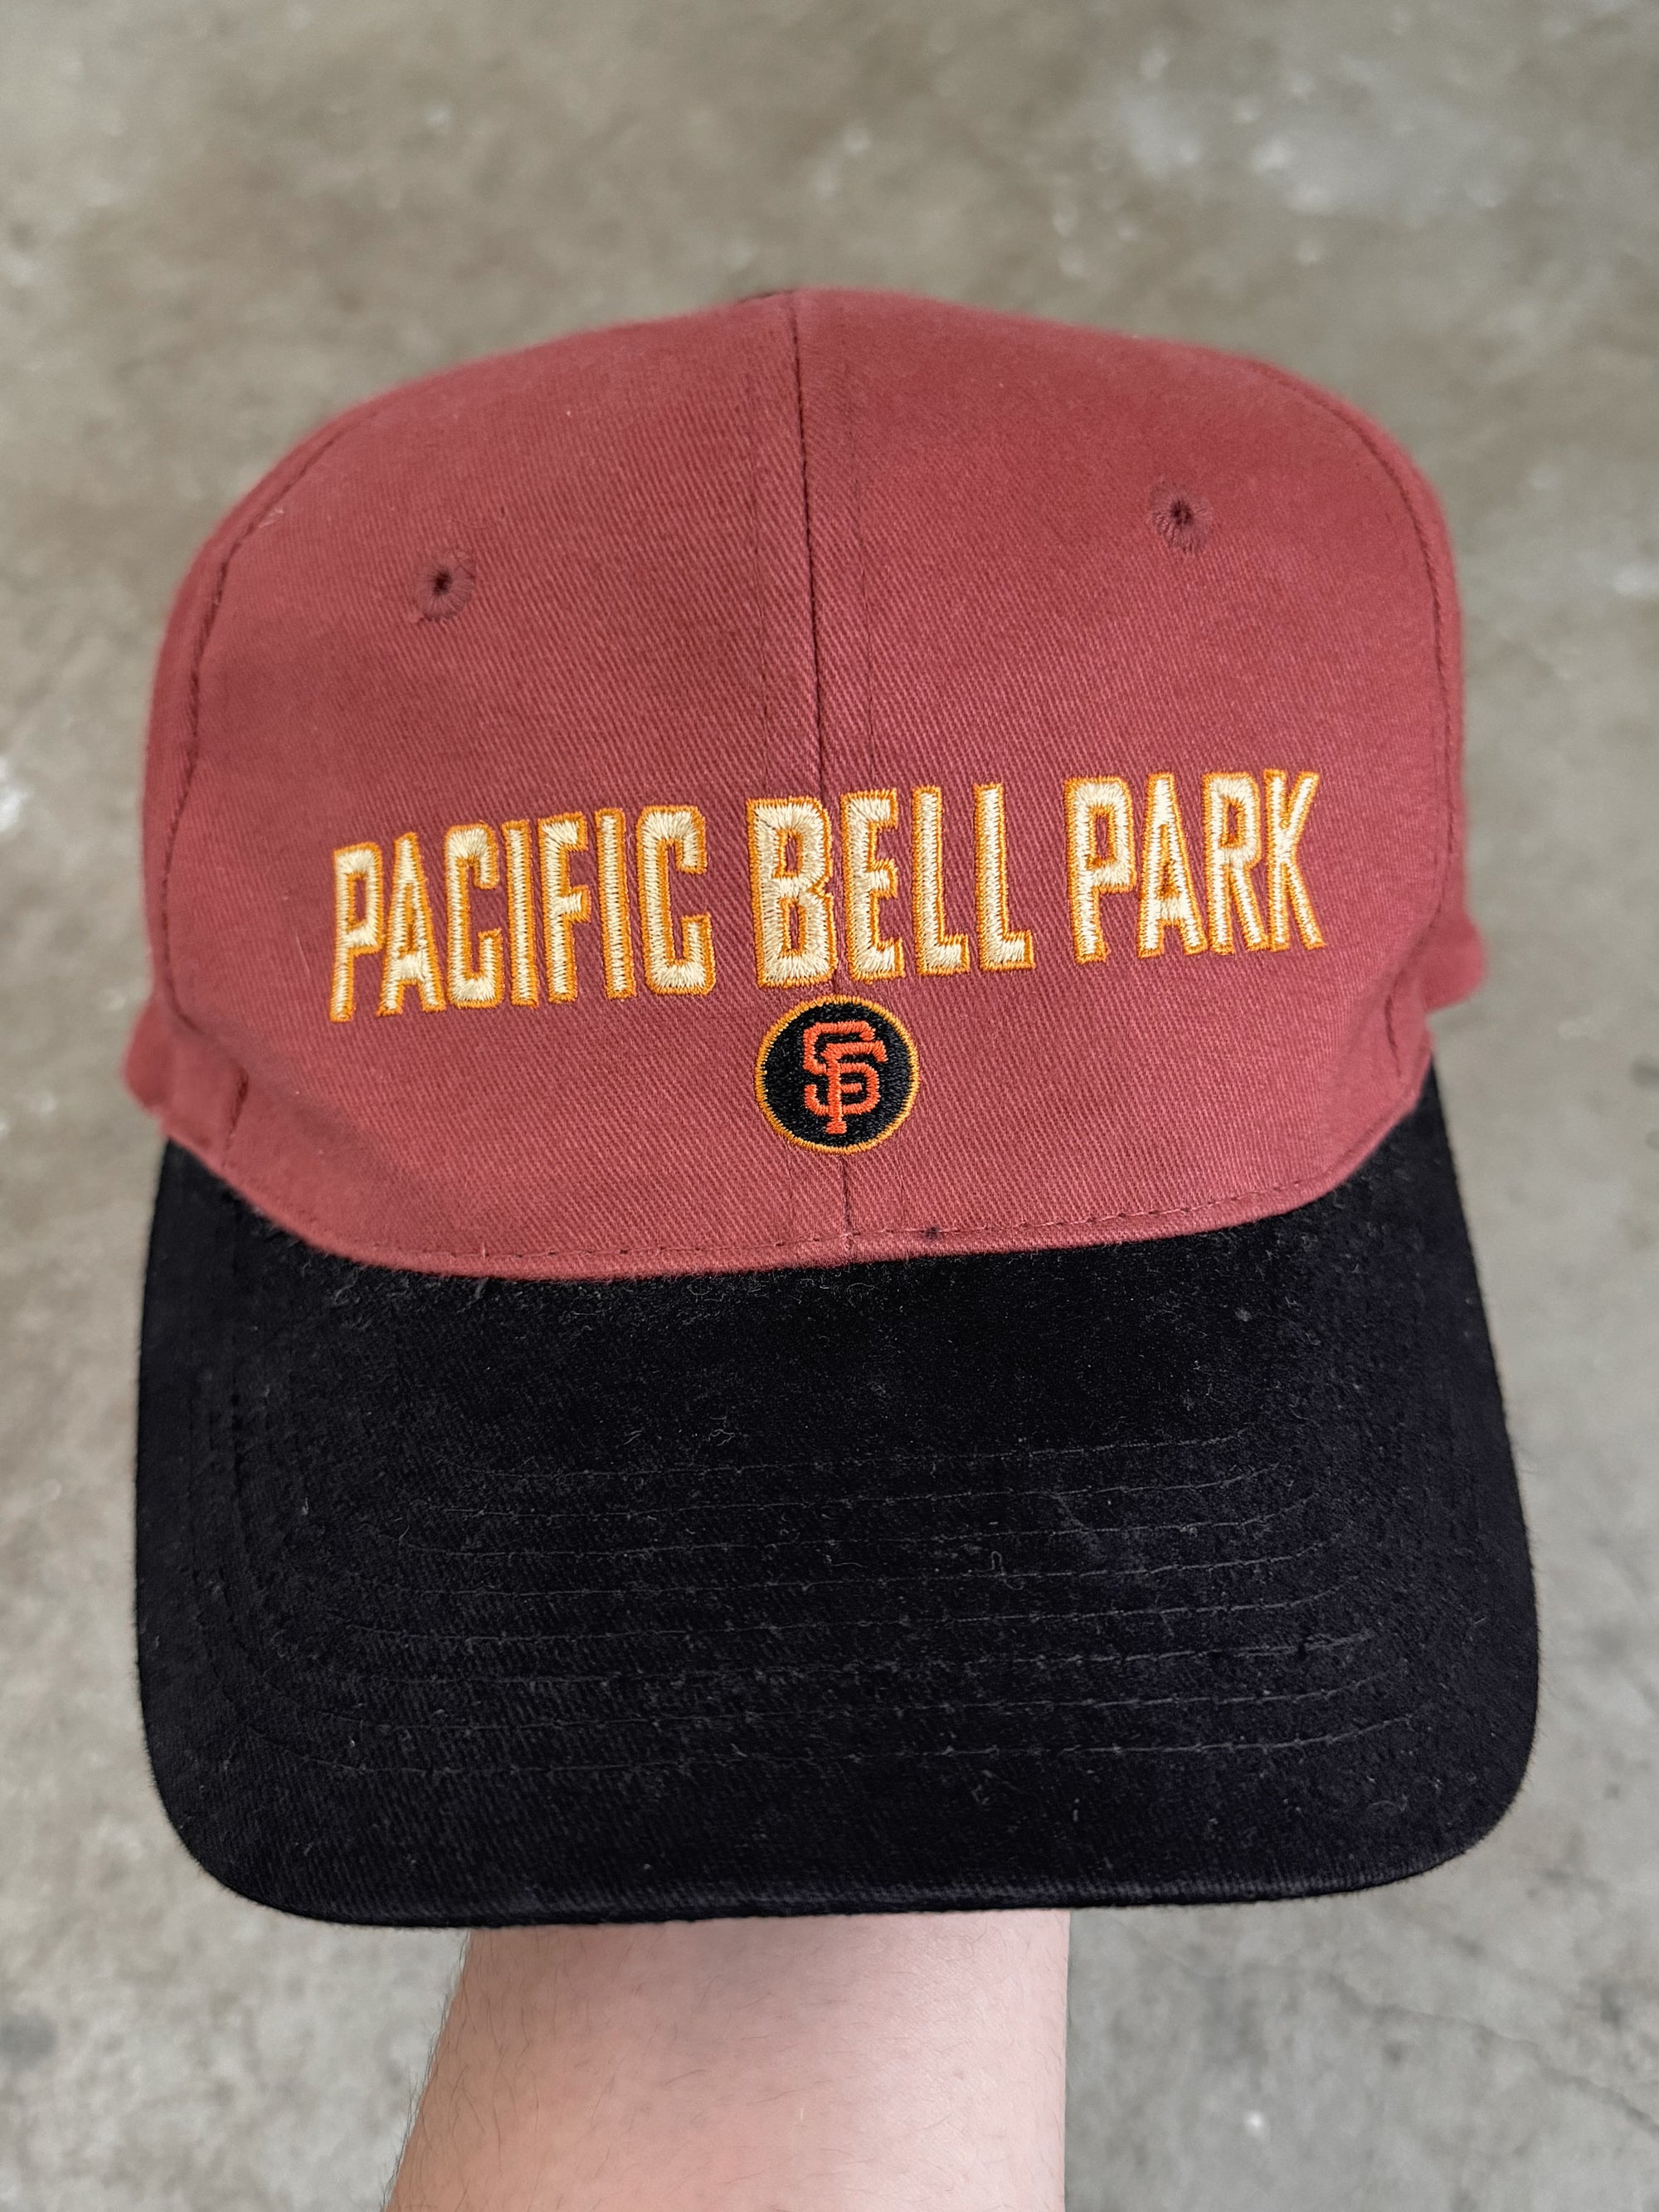 2000 "Pacific Bell Park" Hat